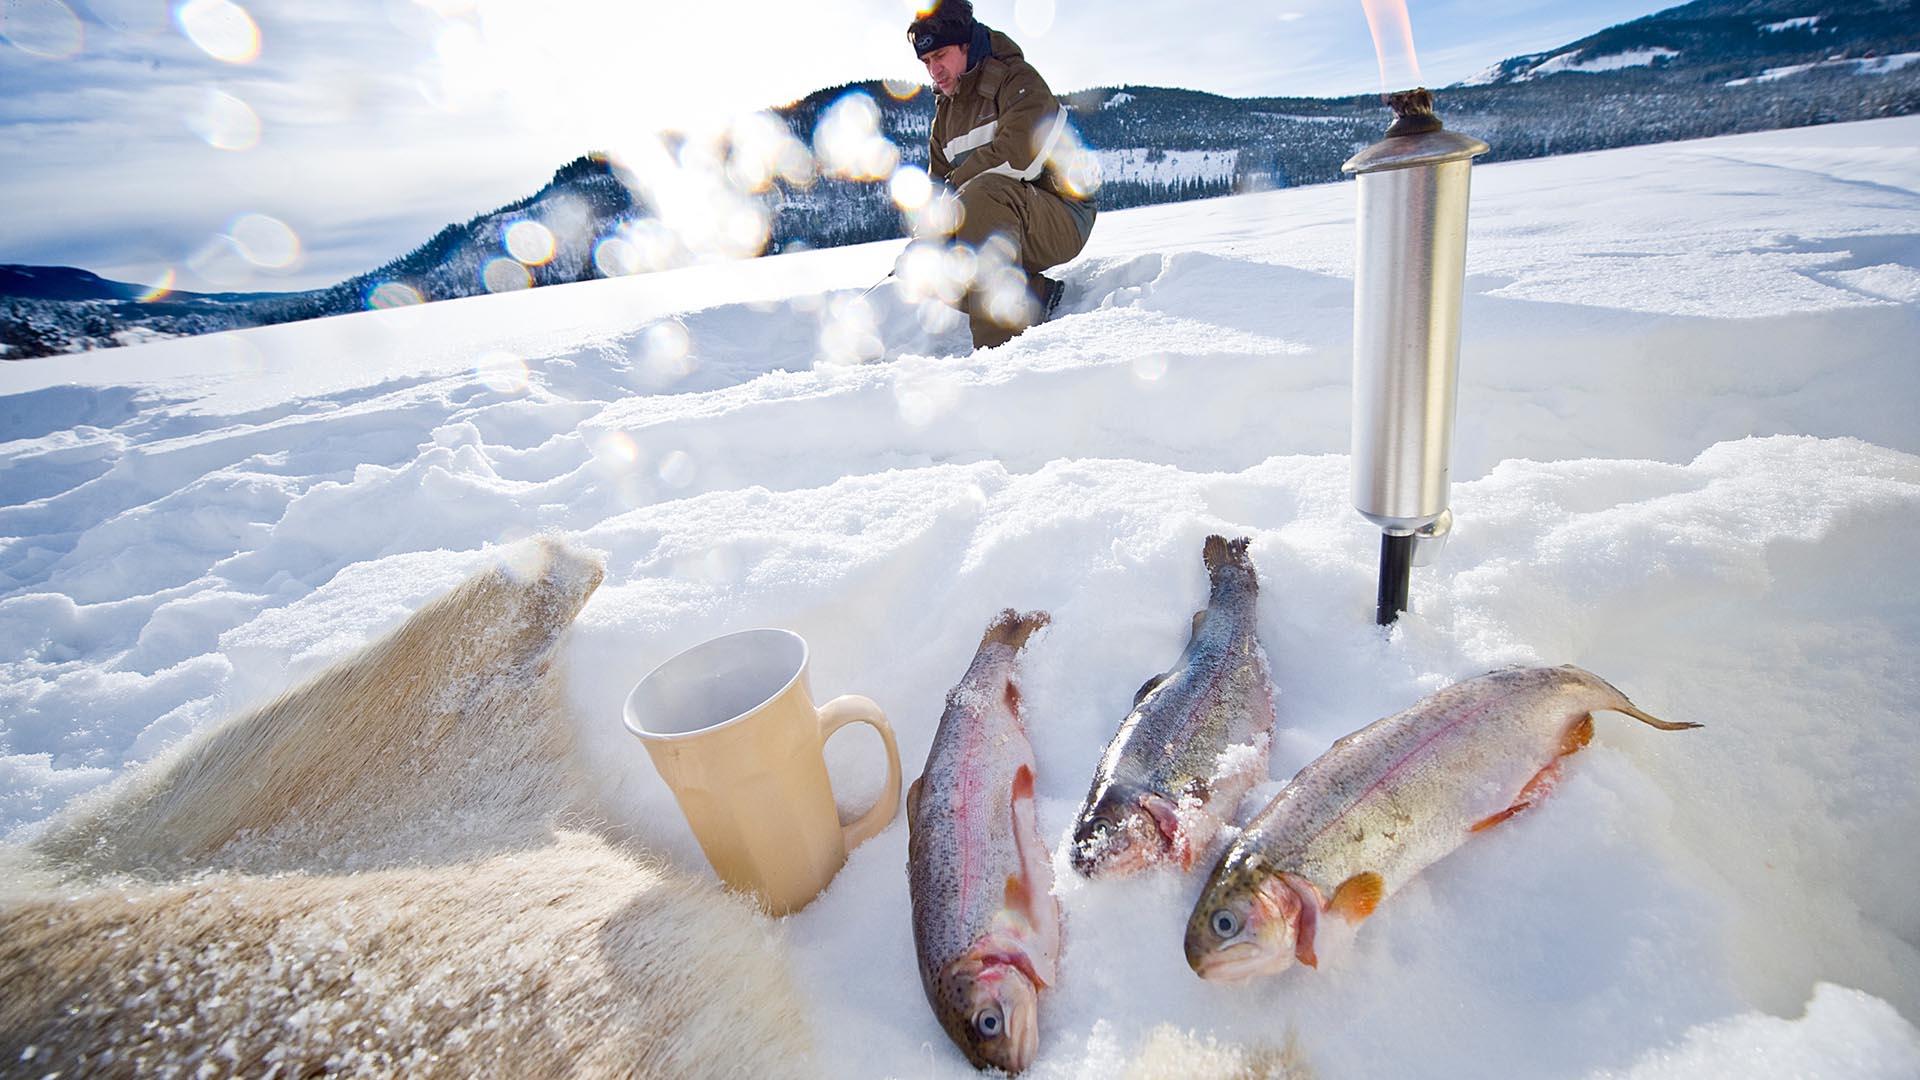 Ice Fishing in Valdres - Valdres